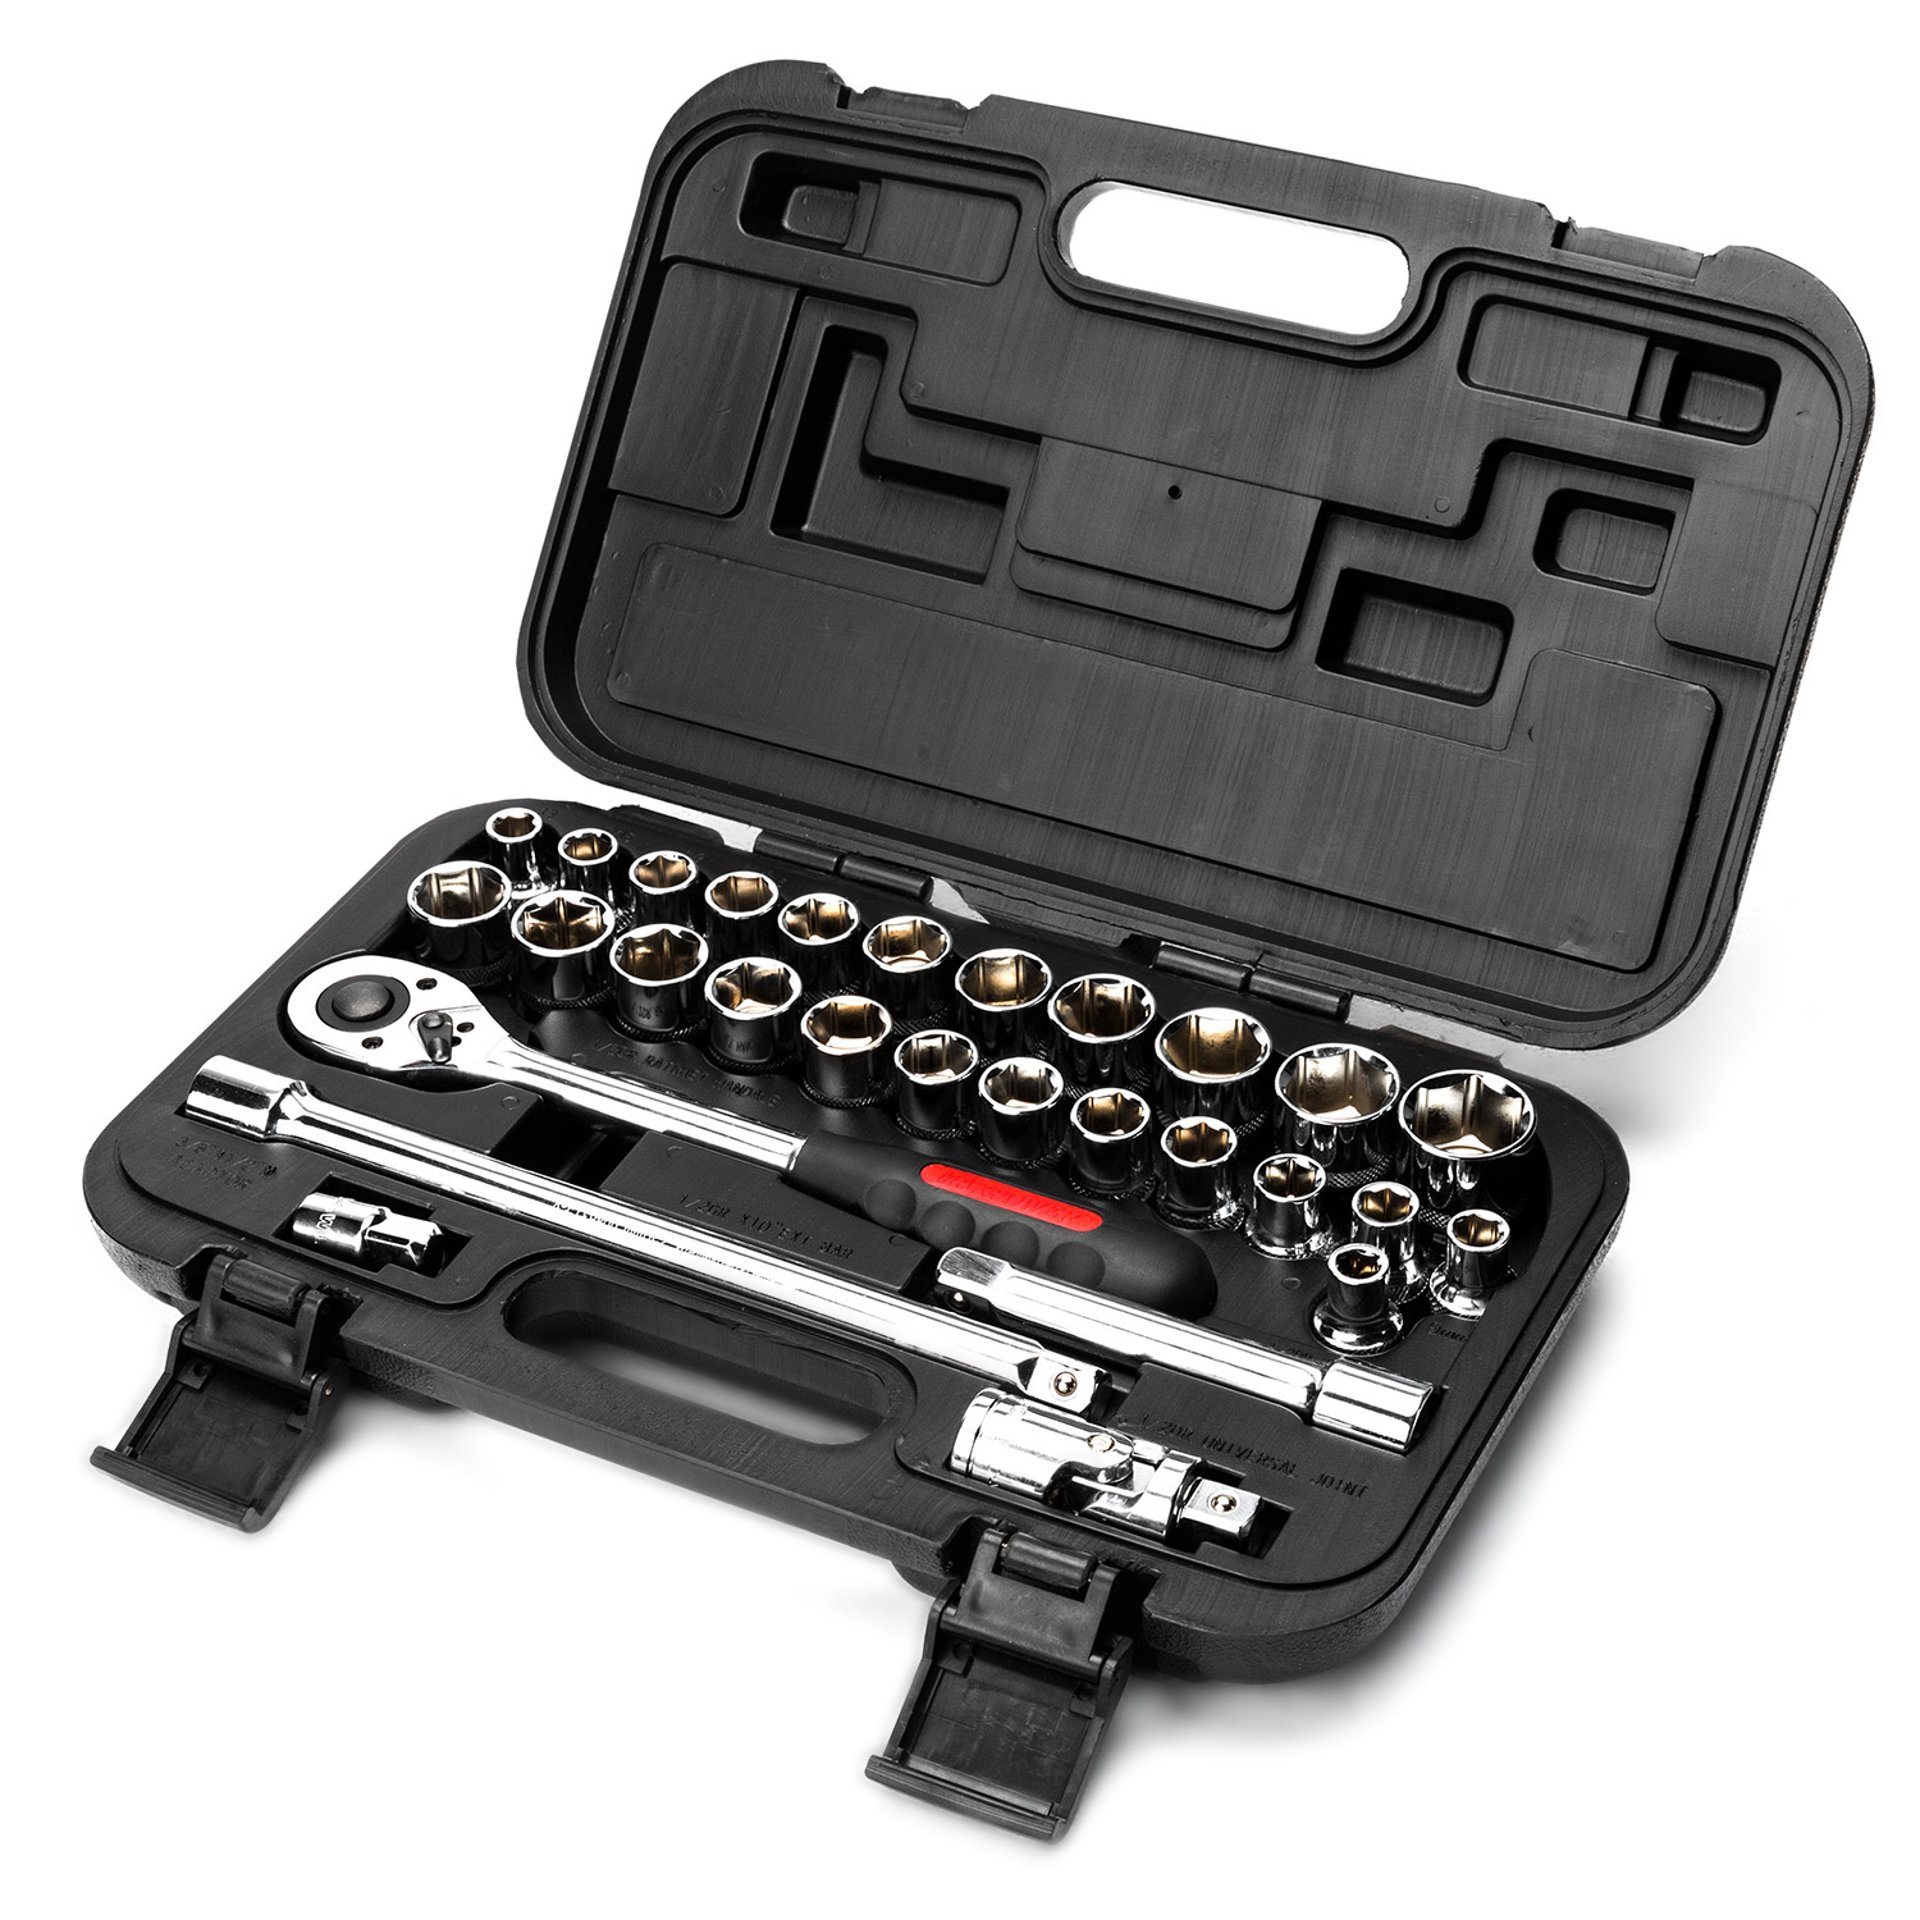 MAXPOWER 30pc 1/2"Dr. Socket Wrench Set